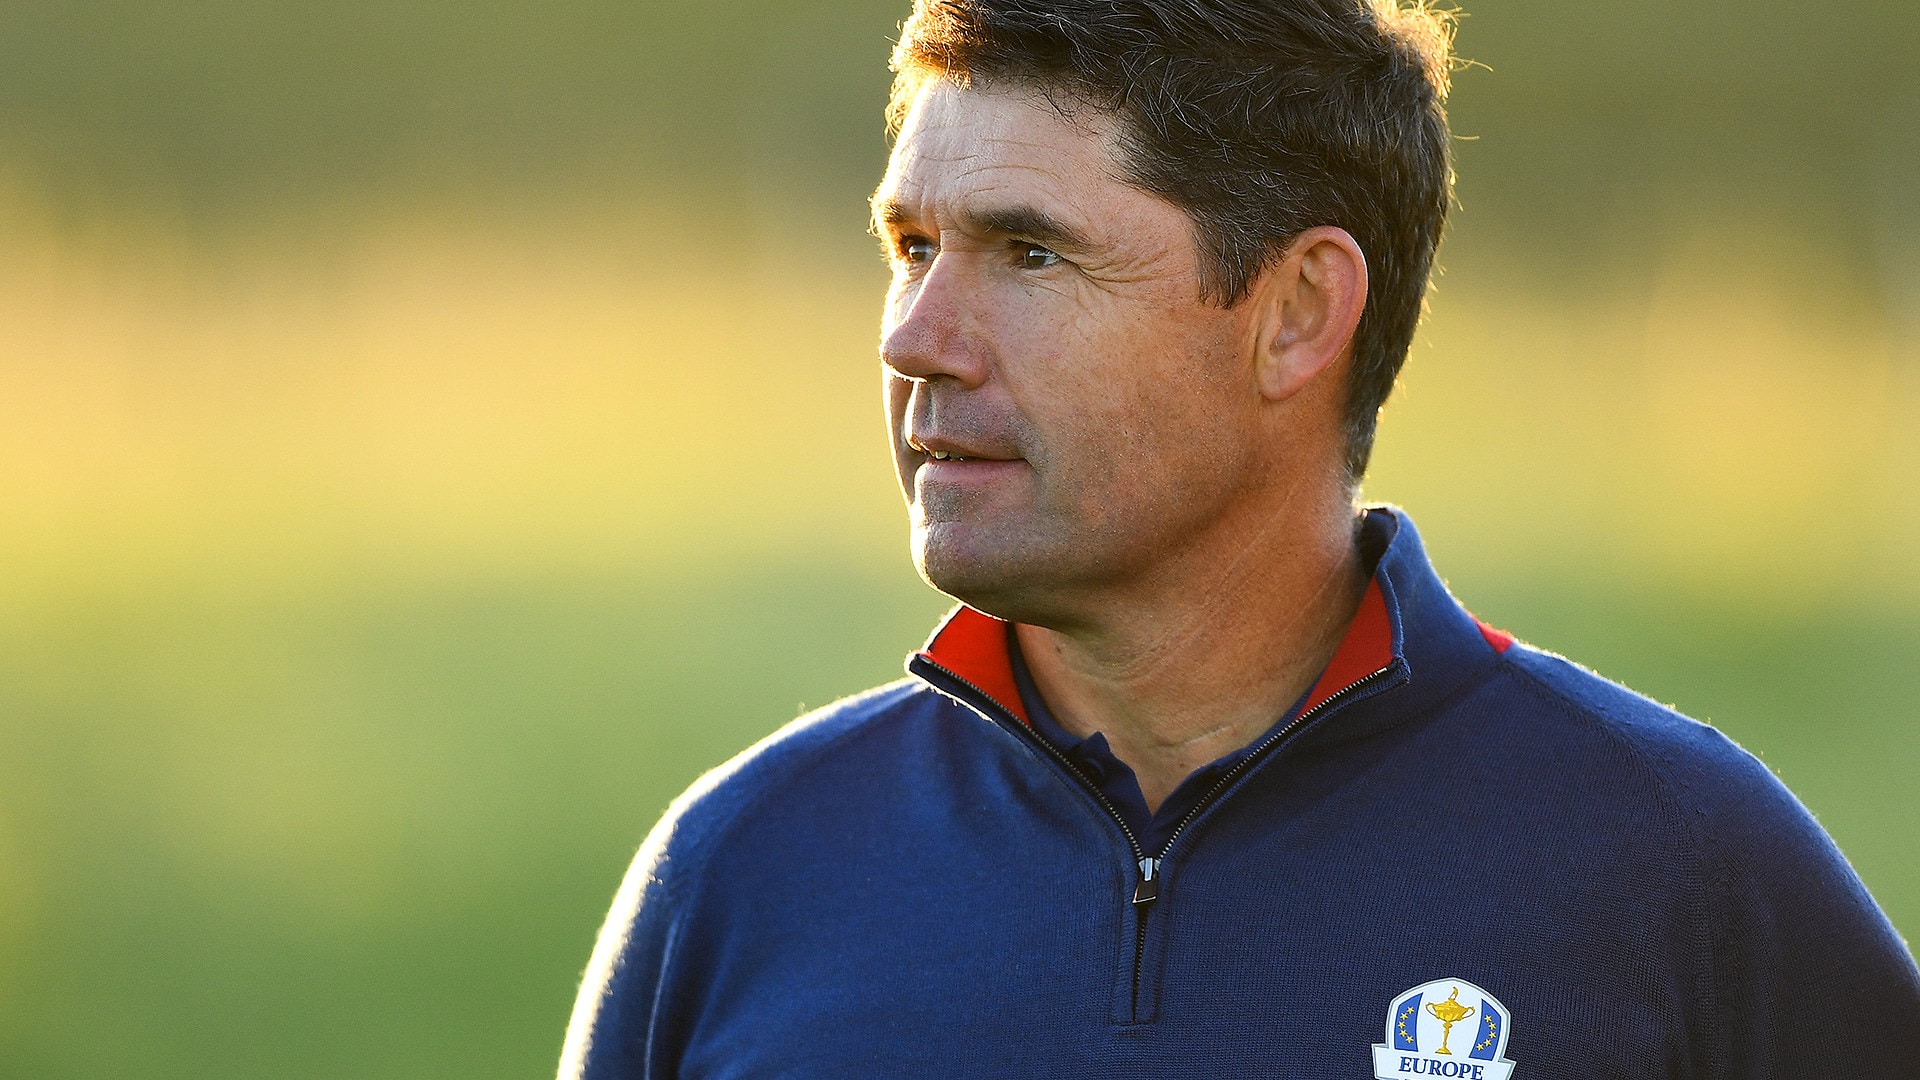 Padraig Harrington out of AT&T Pebble Beach after positive COVID-19 test